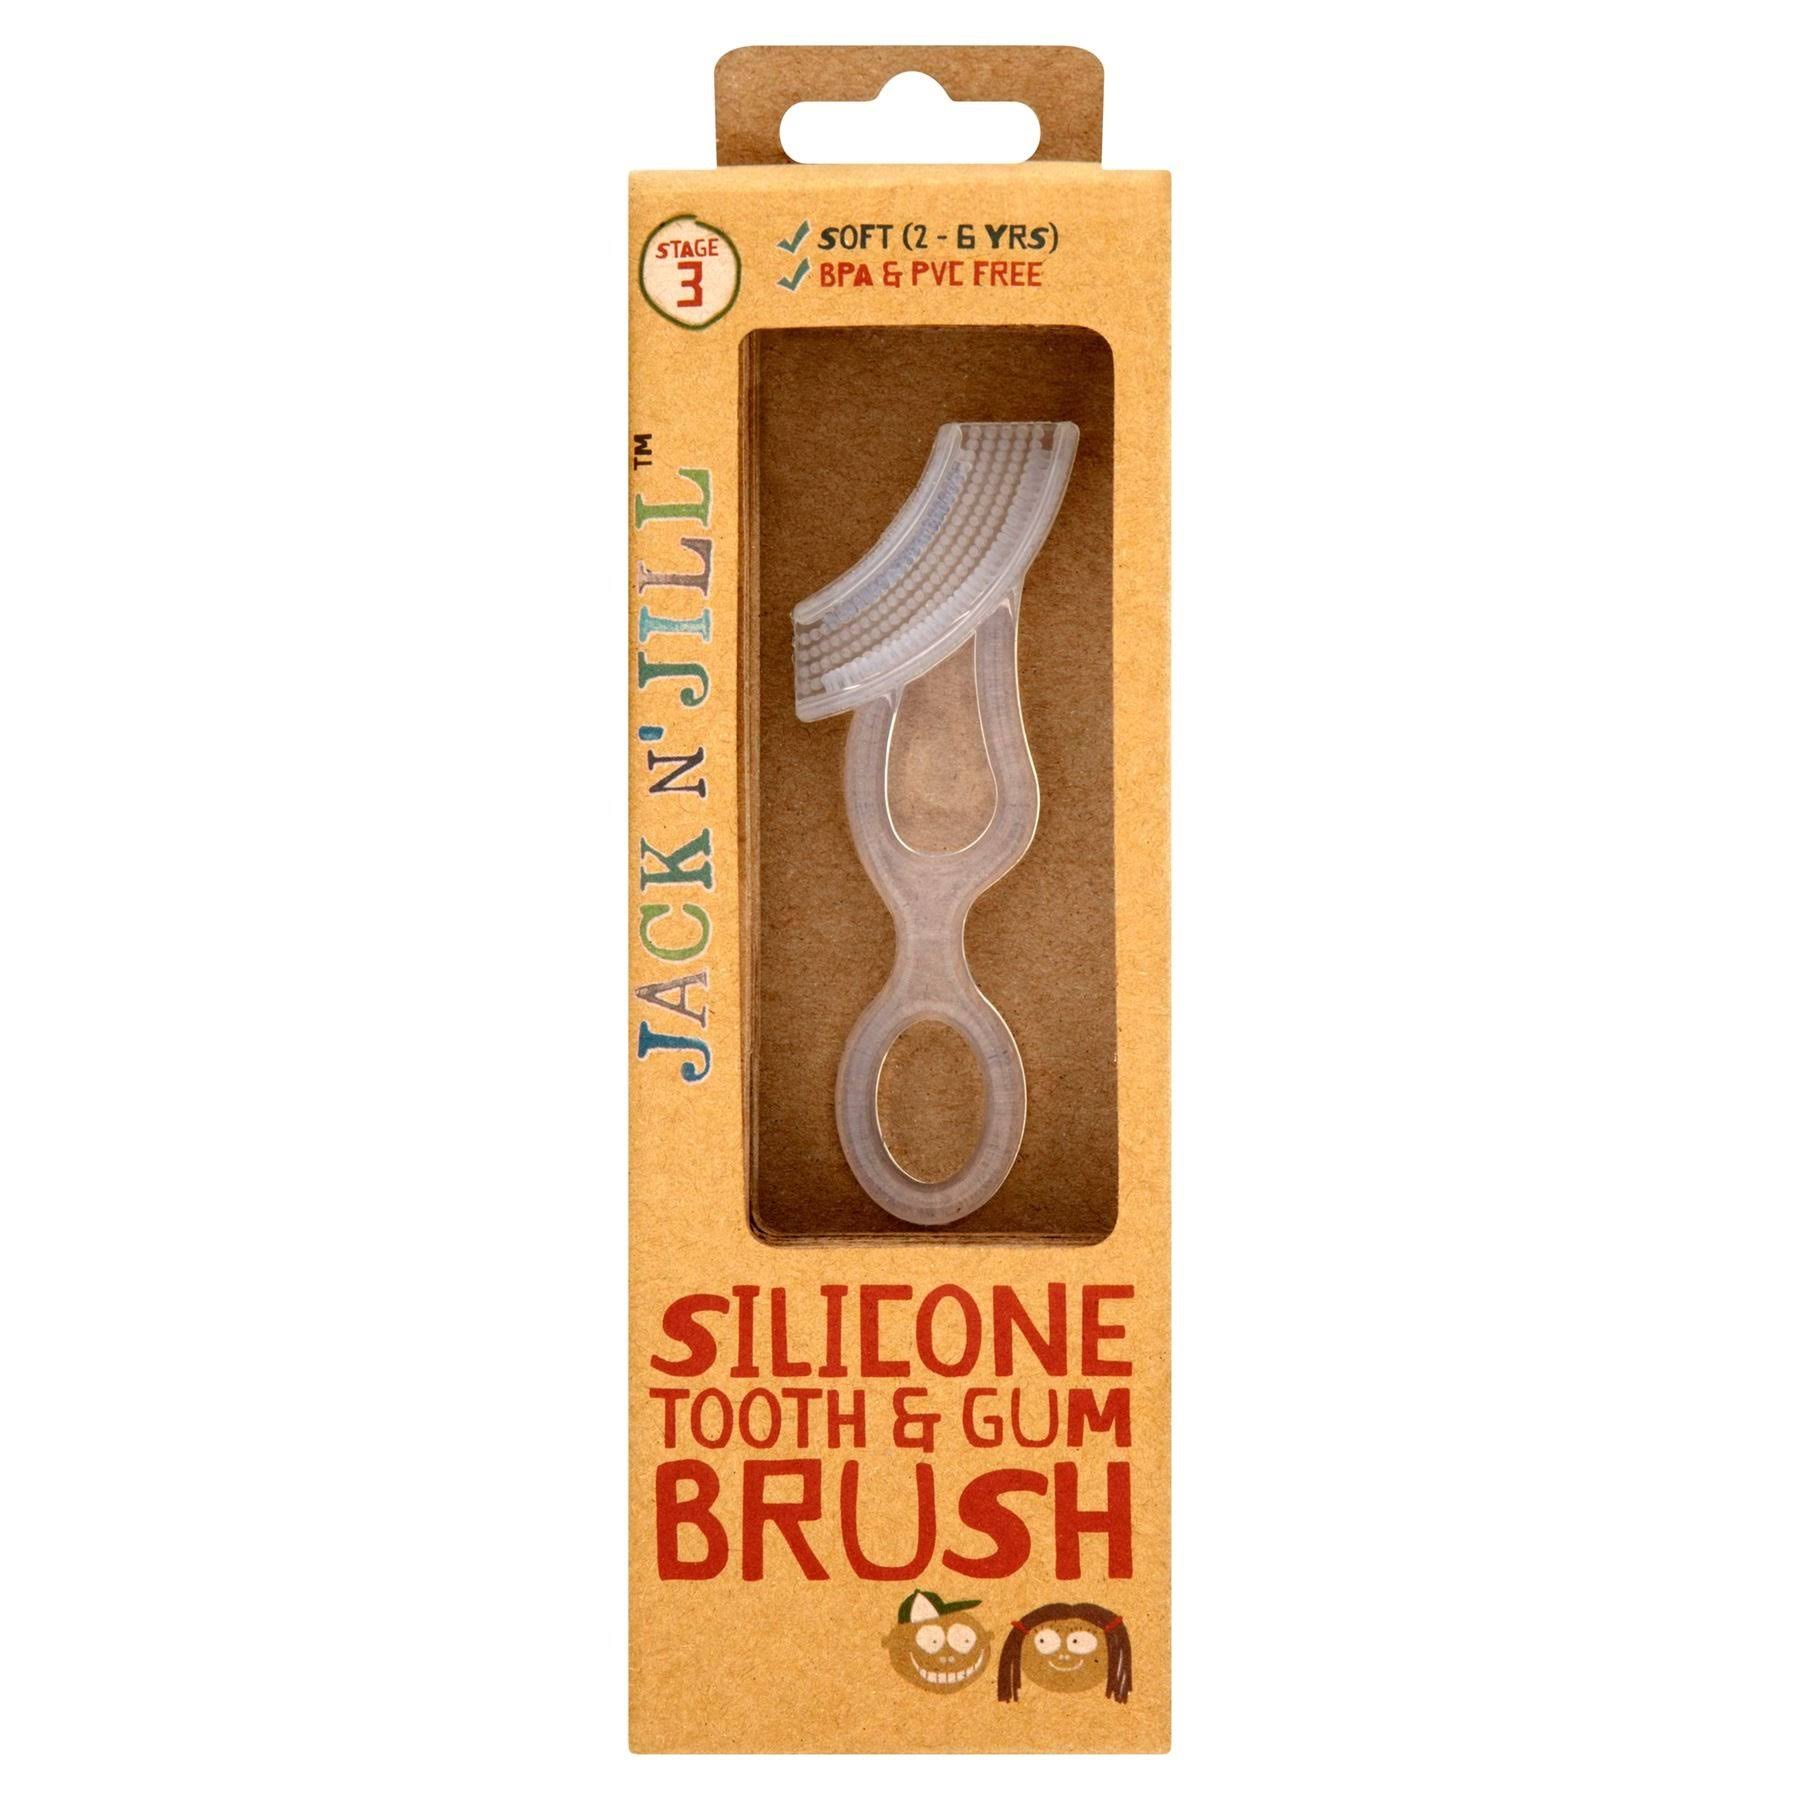 Jack & Jill Silicone Tooth & Gum Brush - Stage 3